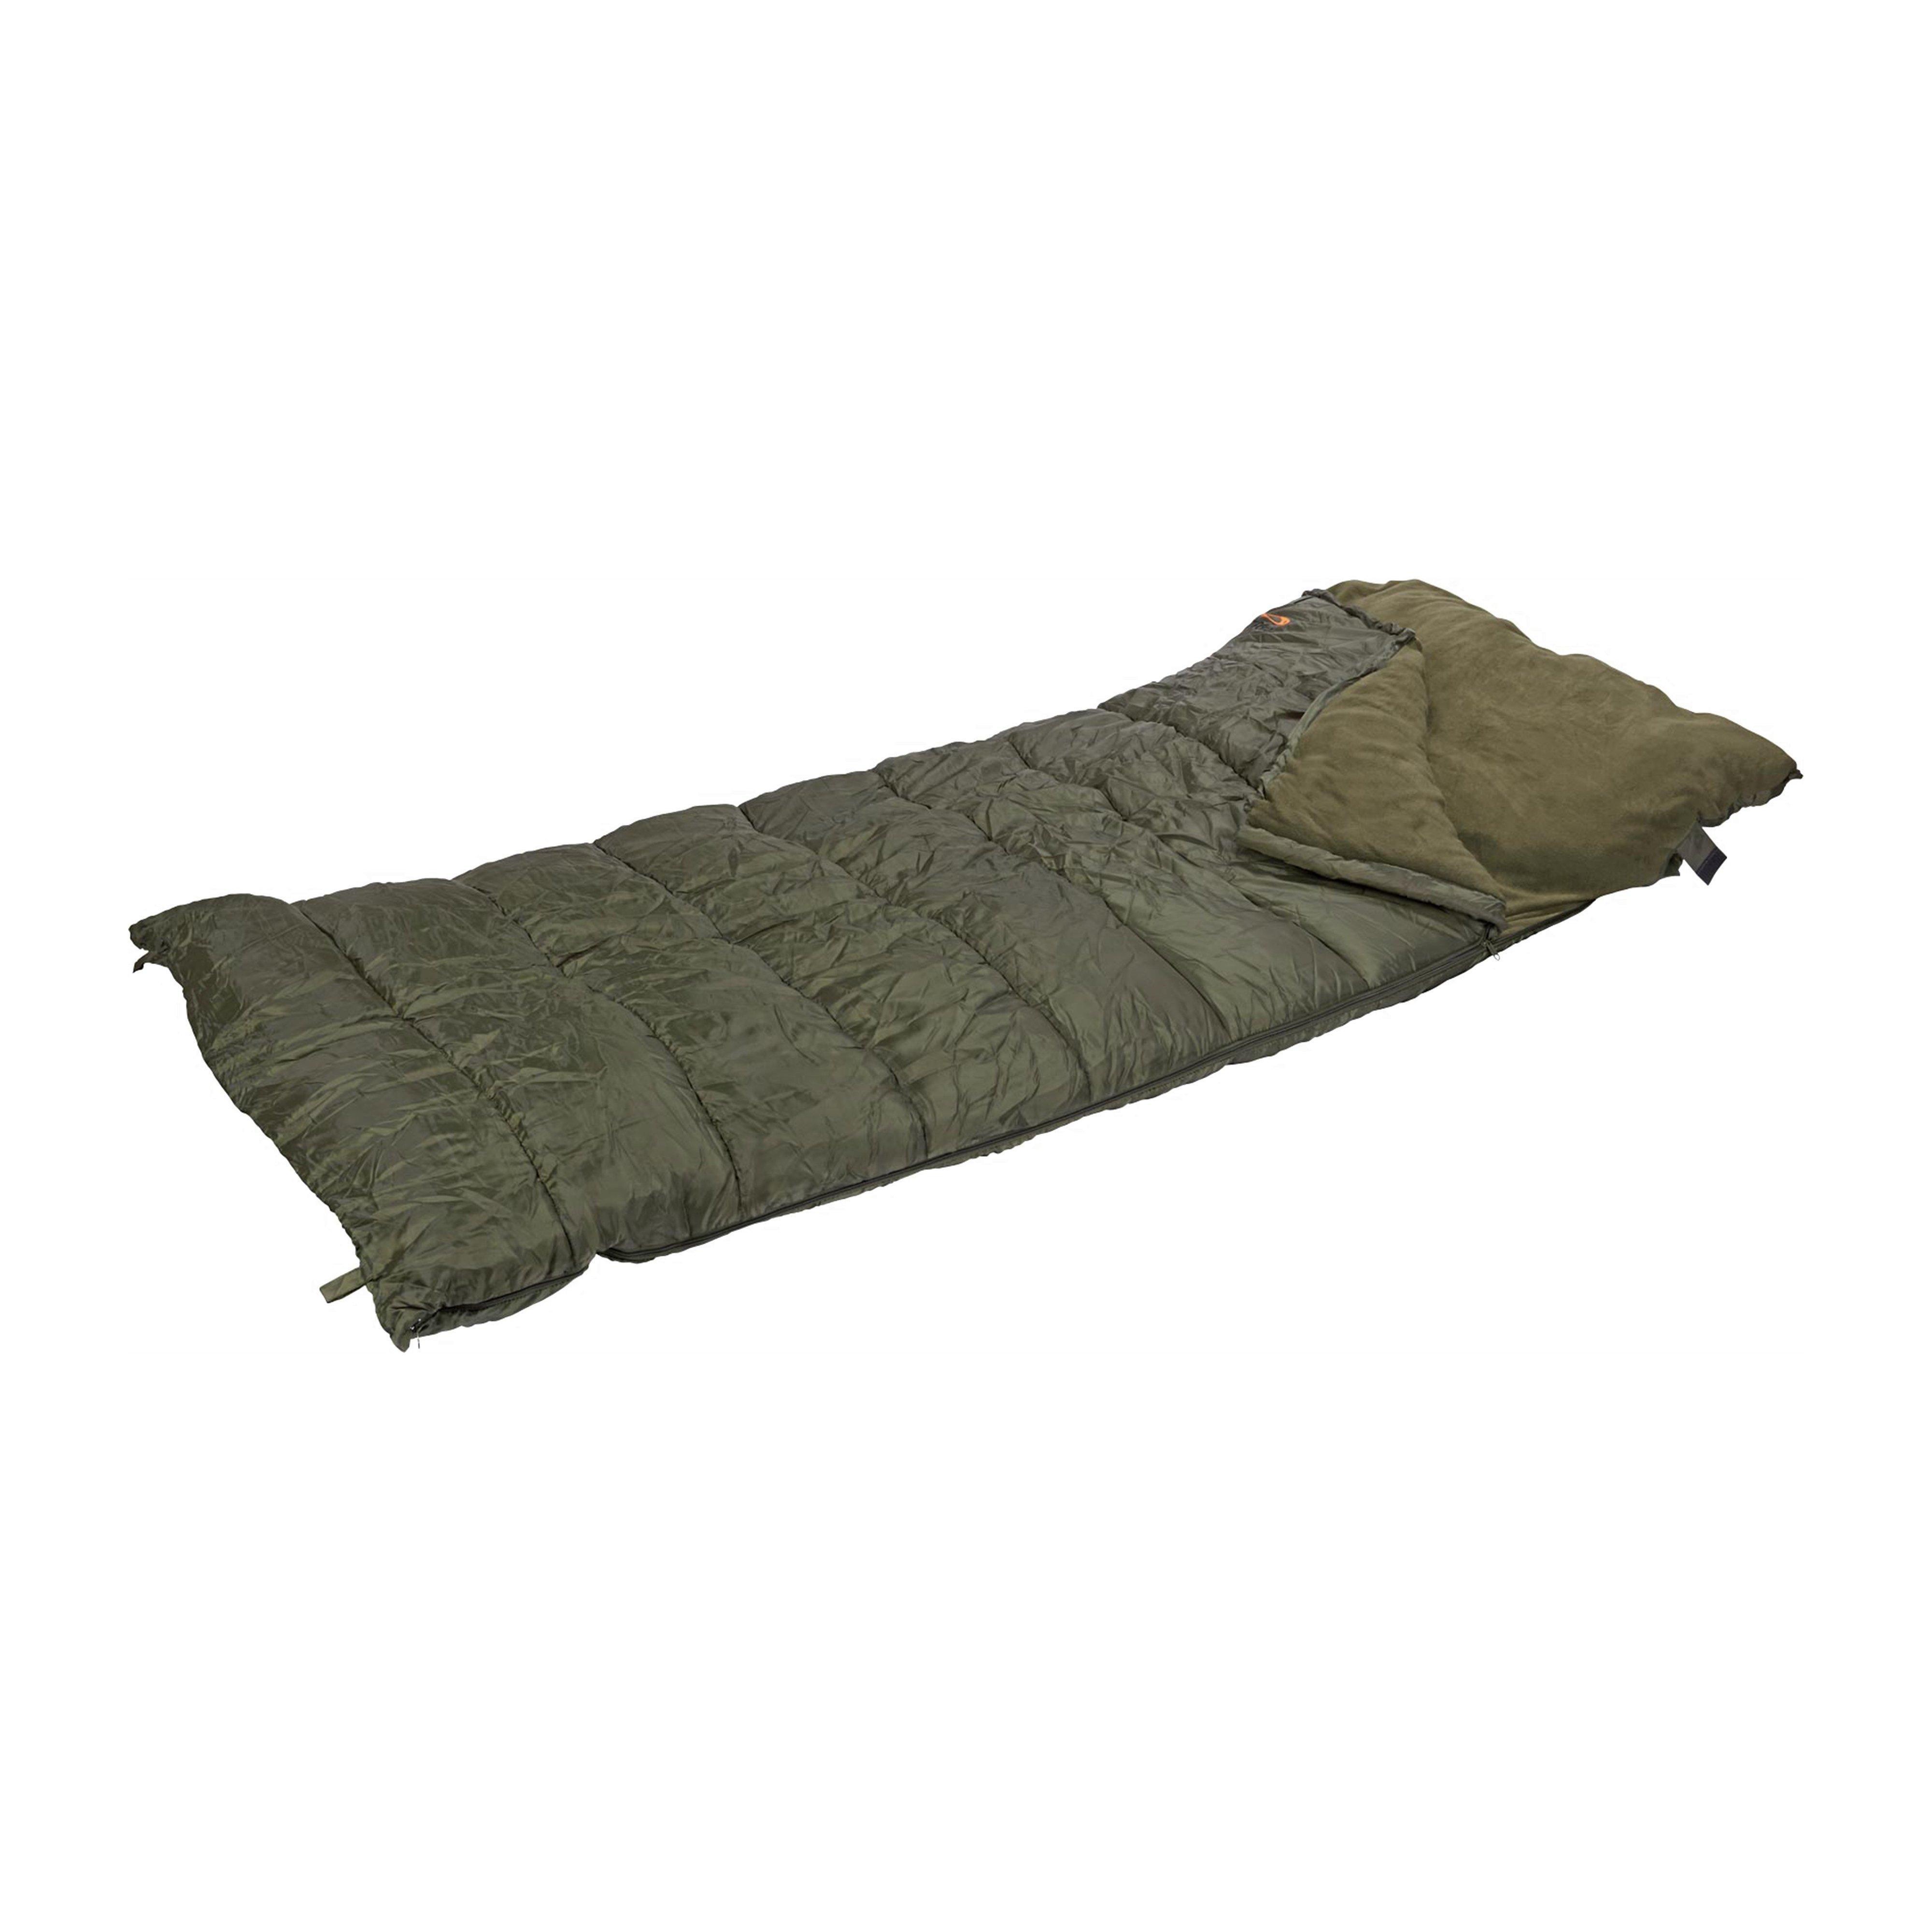 TFGear Chill Out 4 Season Sleeping Bag (Giant) Review